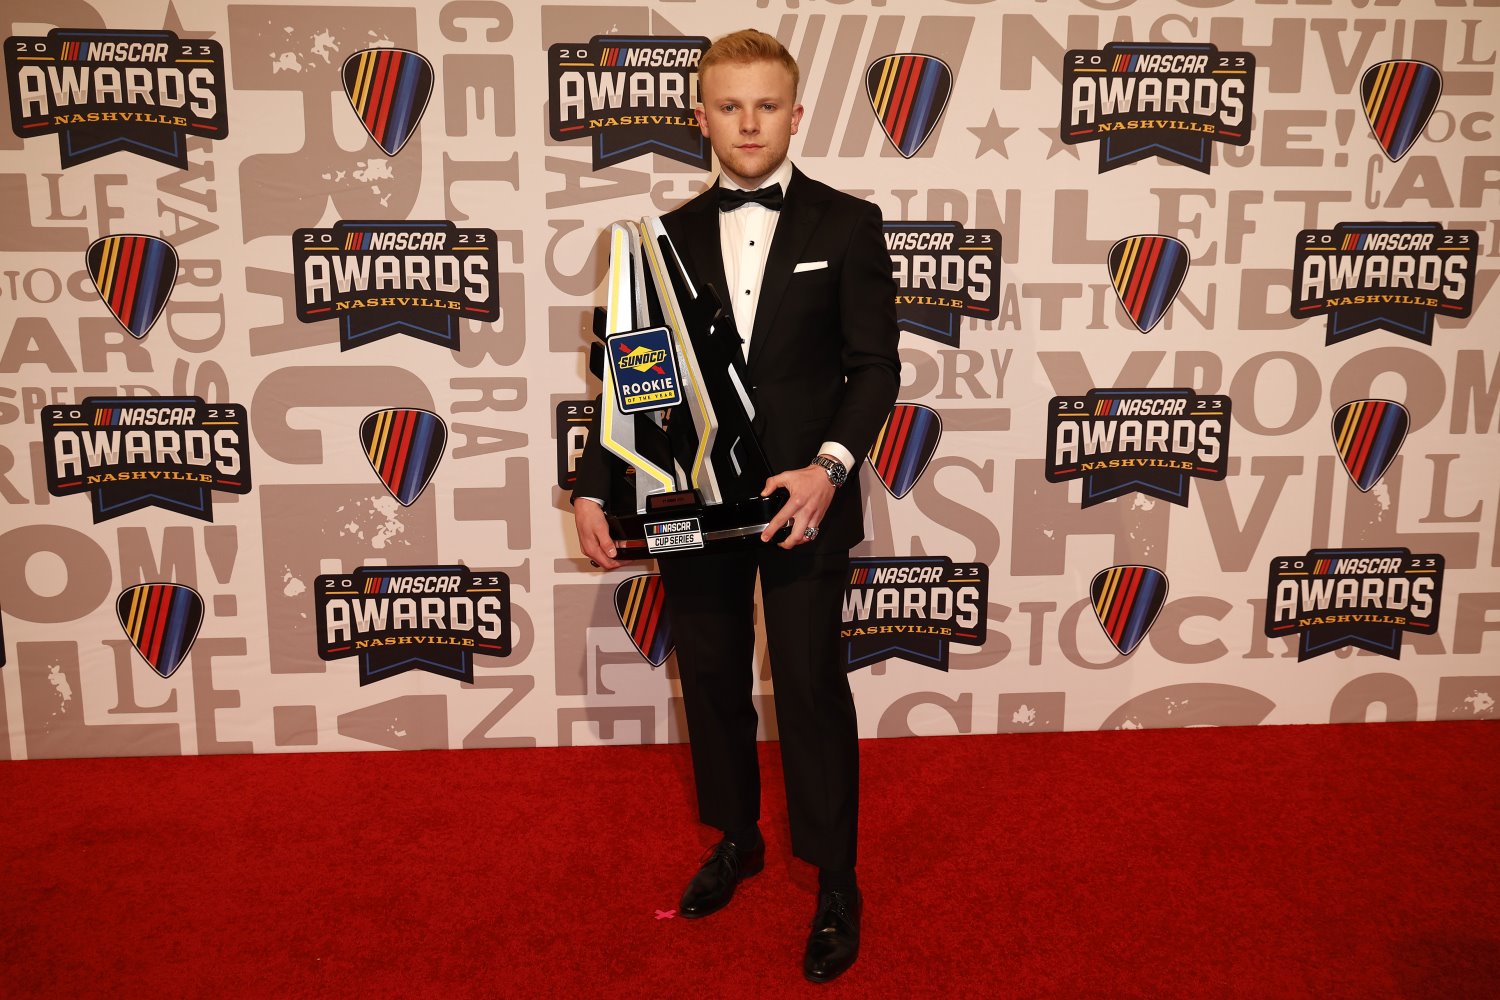 NASCAR Cup Series driver, Ty Gibbs poses for photos with the 2023 NASCAR Cup Series Sunoco Rookie of the Year trophy on the red carpet prior to the NASCAR Awards and Champion Celebration at the Music City Center on November 30, 2023 in Nashville, Tennessee. (Photo by Chris Graythen/Getty Images)